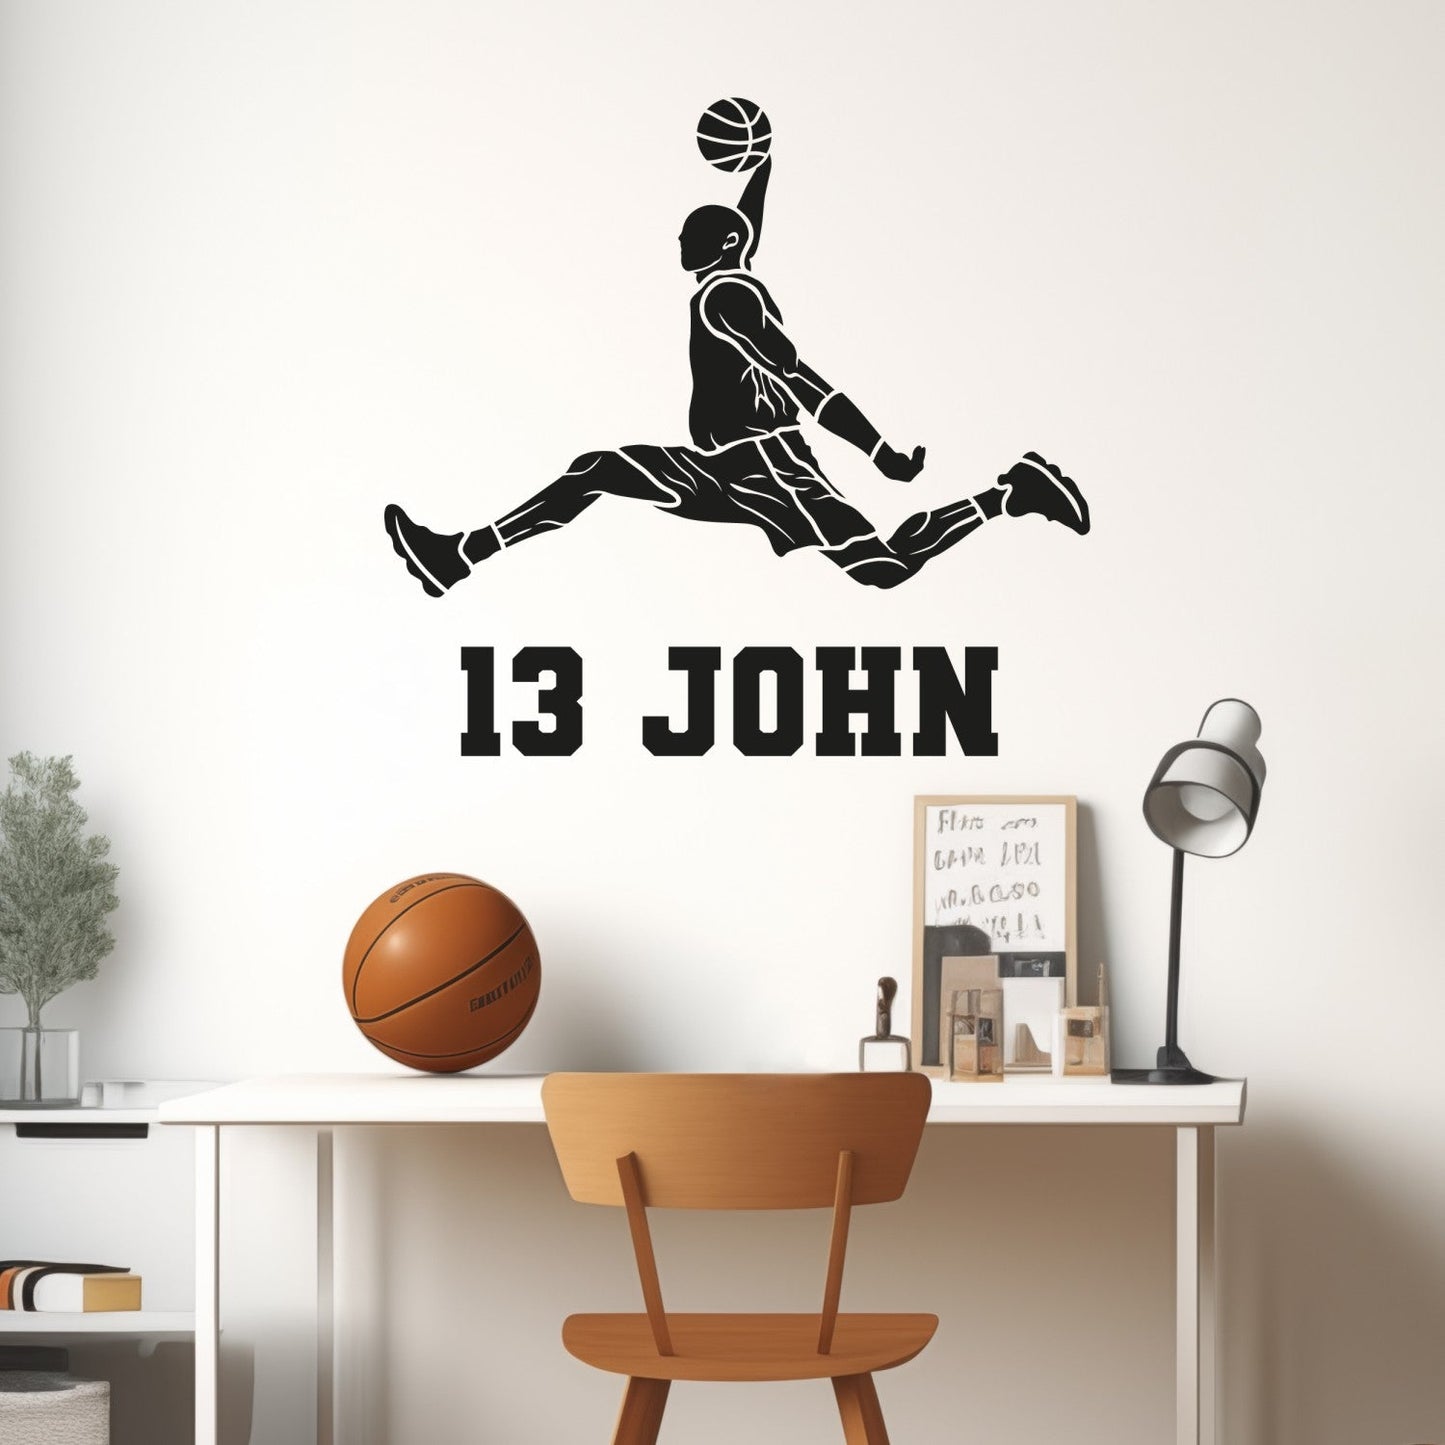 Custom Basketball Wall Decal - Basketball Wall Stickers for Boys' Bedroom - Personalized Basketball Decals for Walls - Basketball Room Stickers